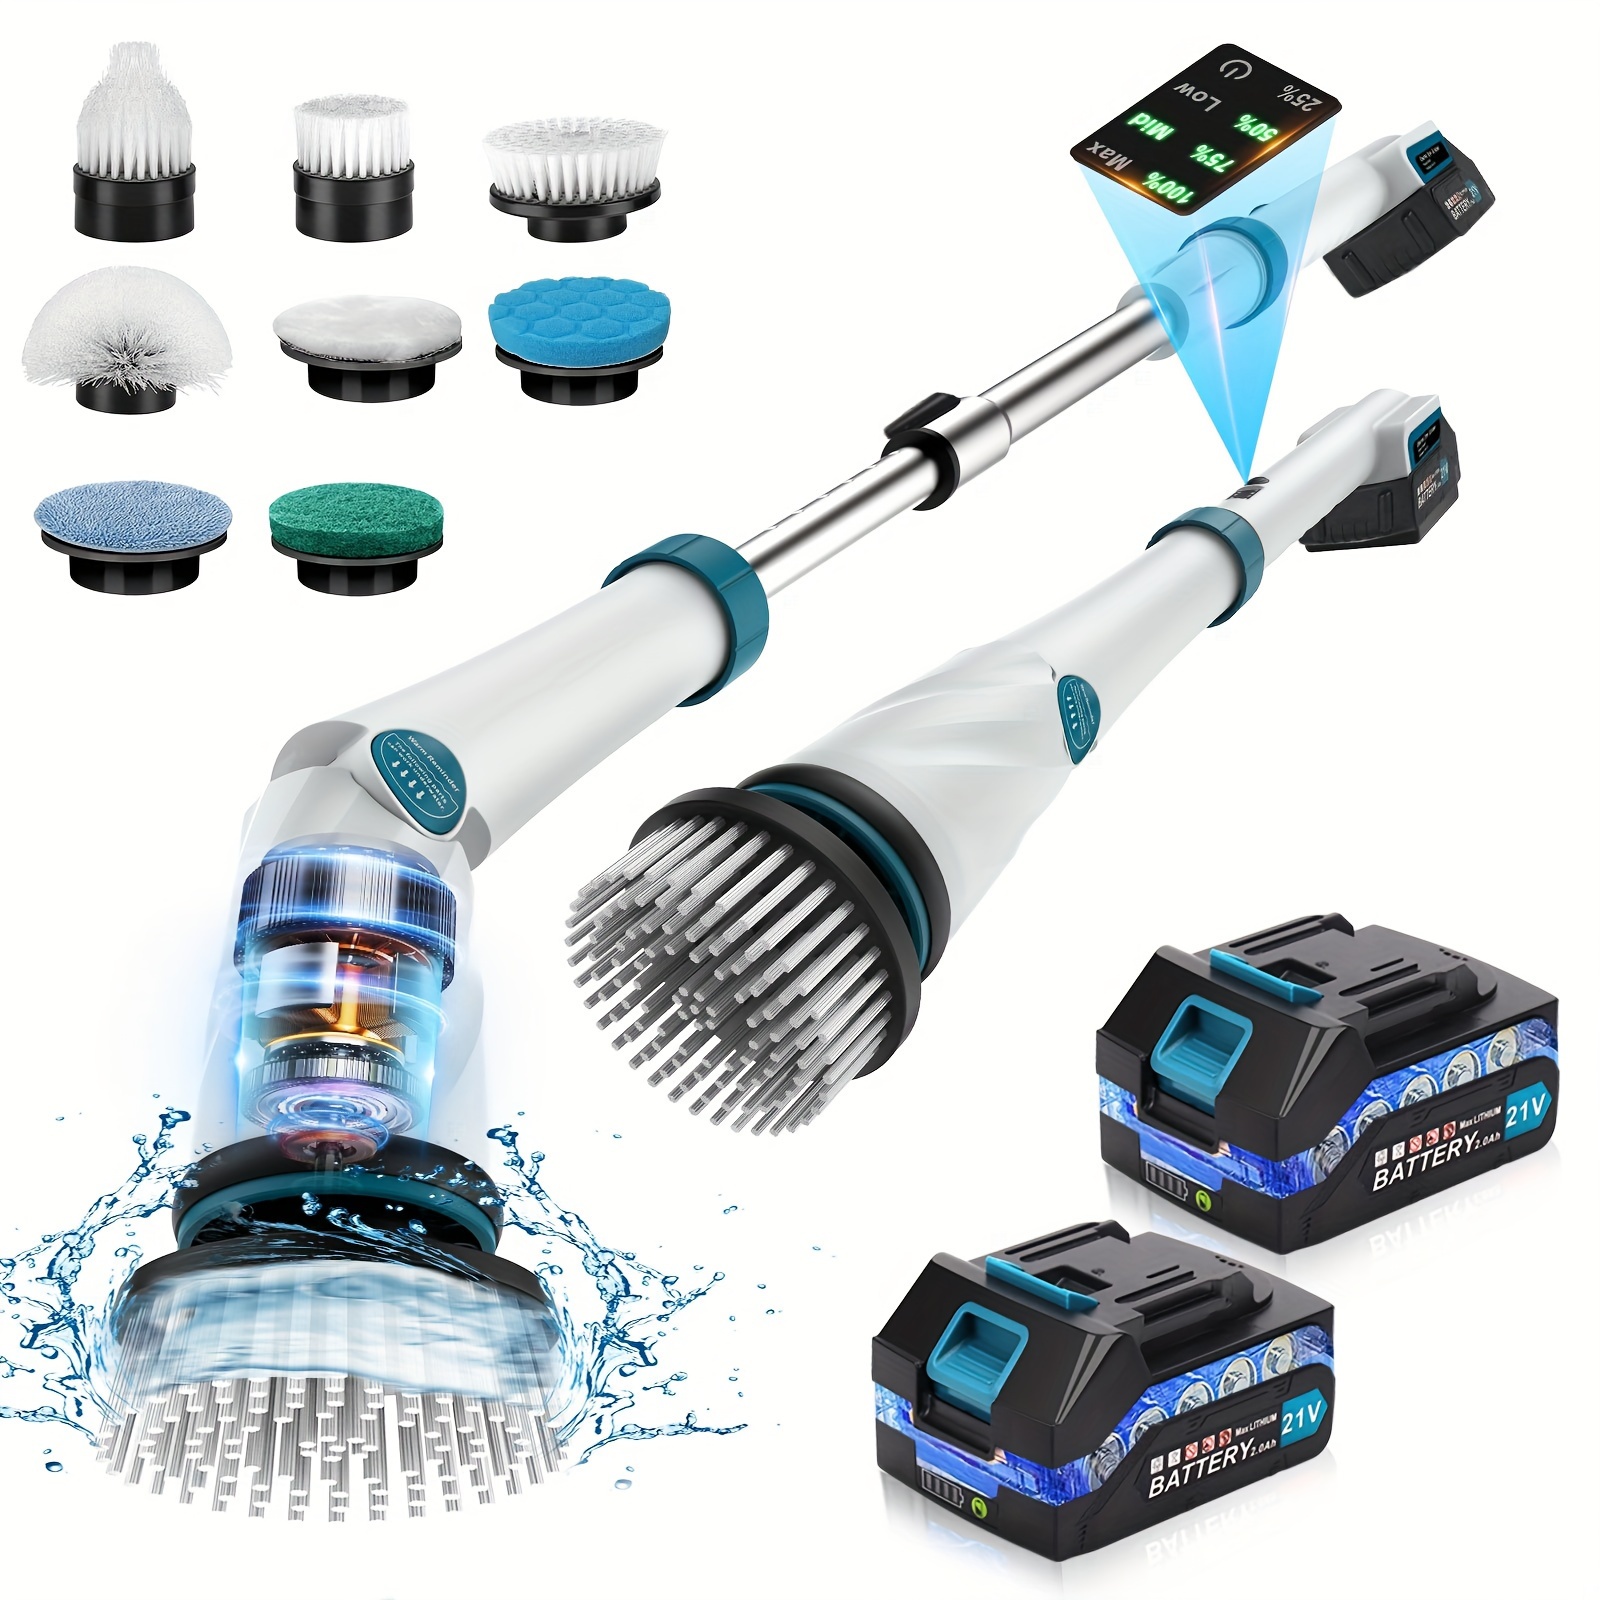 

Battery Electric Scrubber For Cleaning Bathroom, 1200rpm 21v Spin Scrubber Electric Spin Brush For Cleaning, 50'' Cordless Scrubber W/ 8 Brushes For Grout Tile Tub Floor